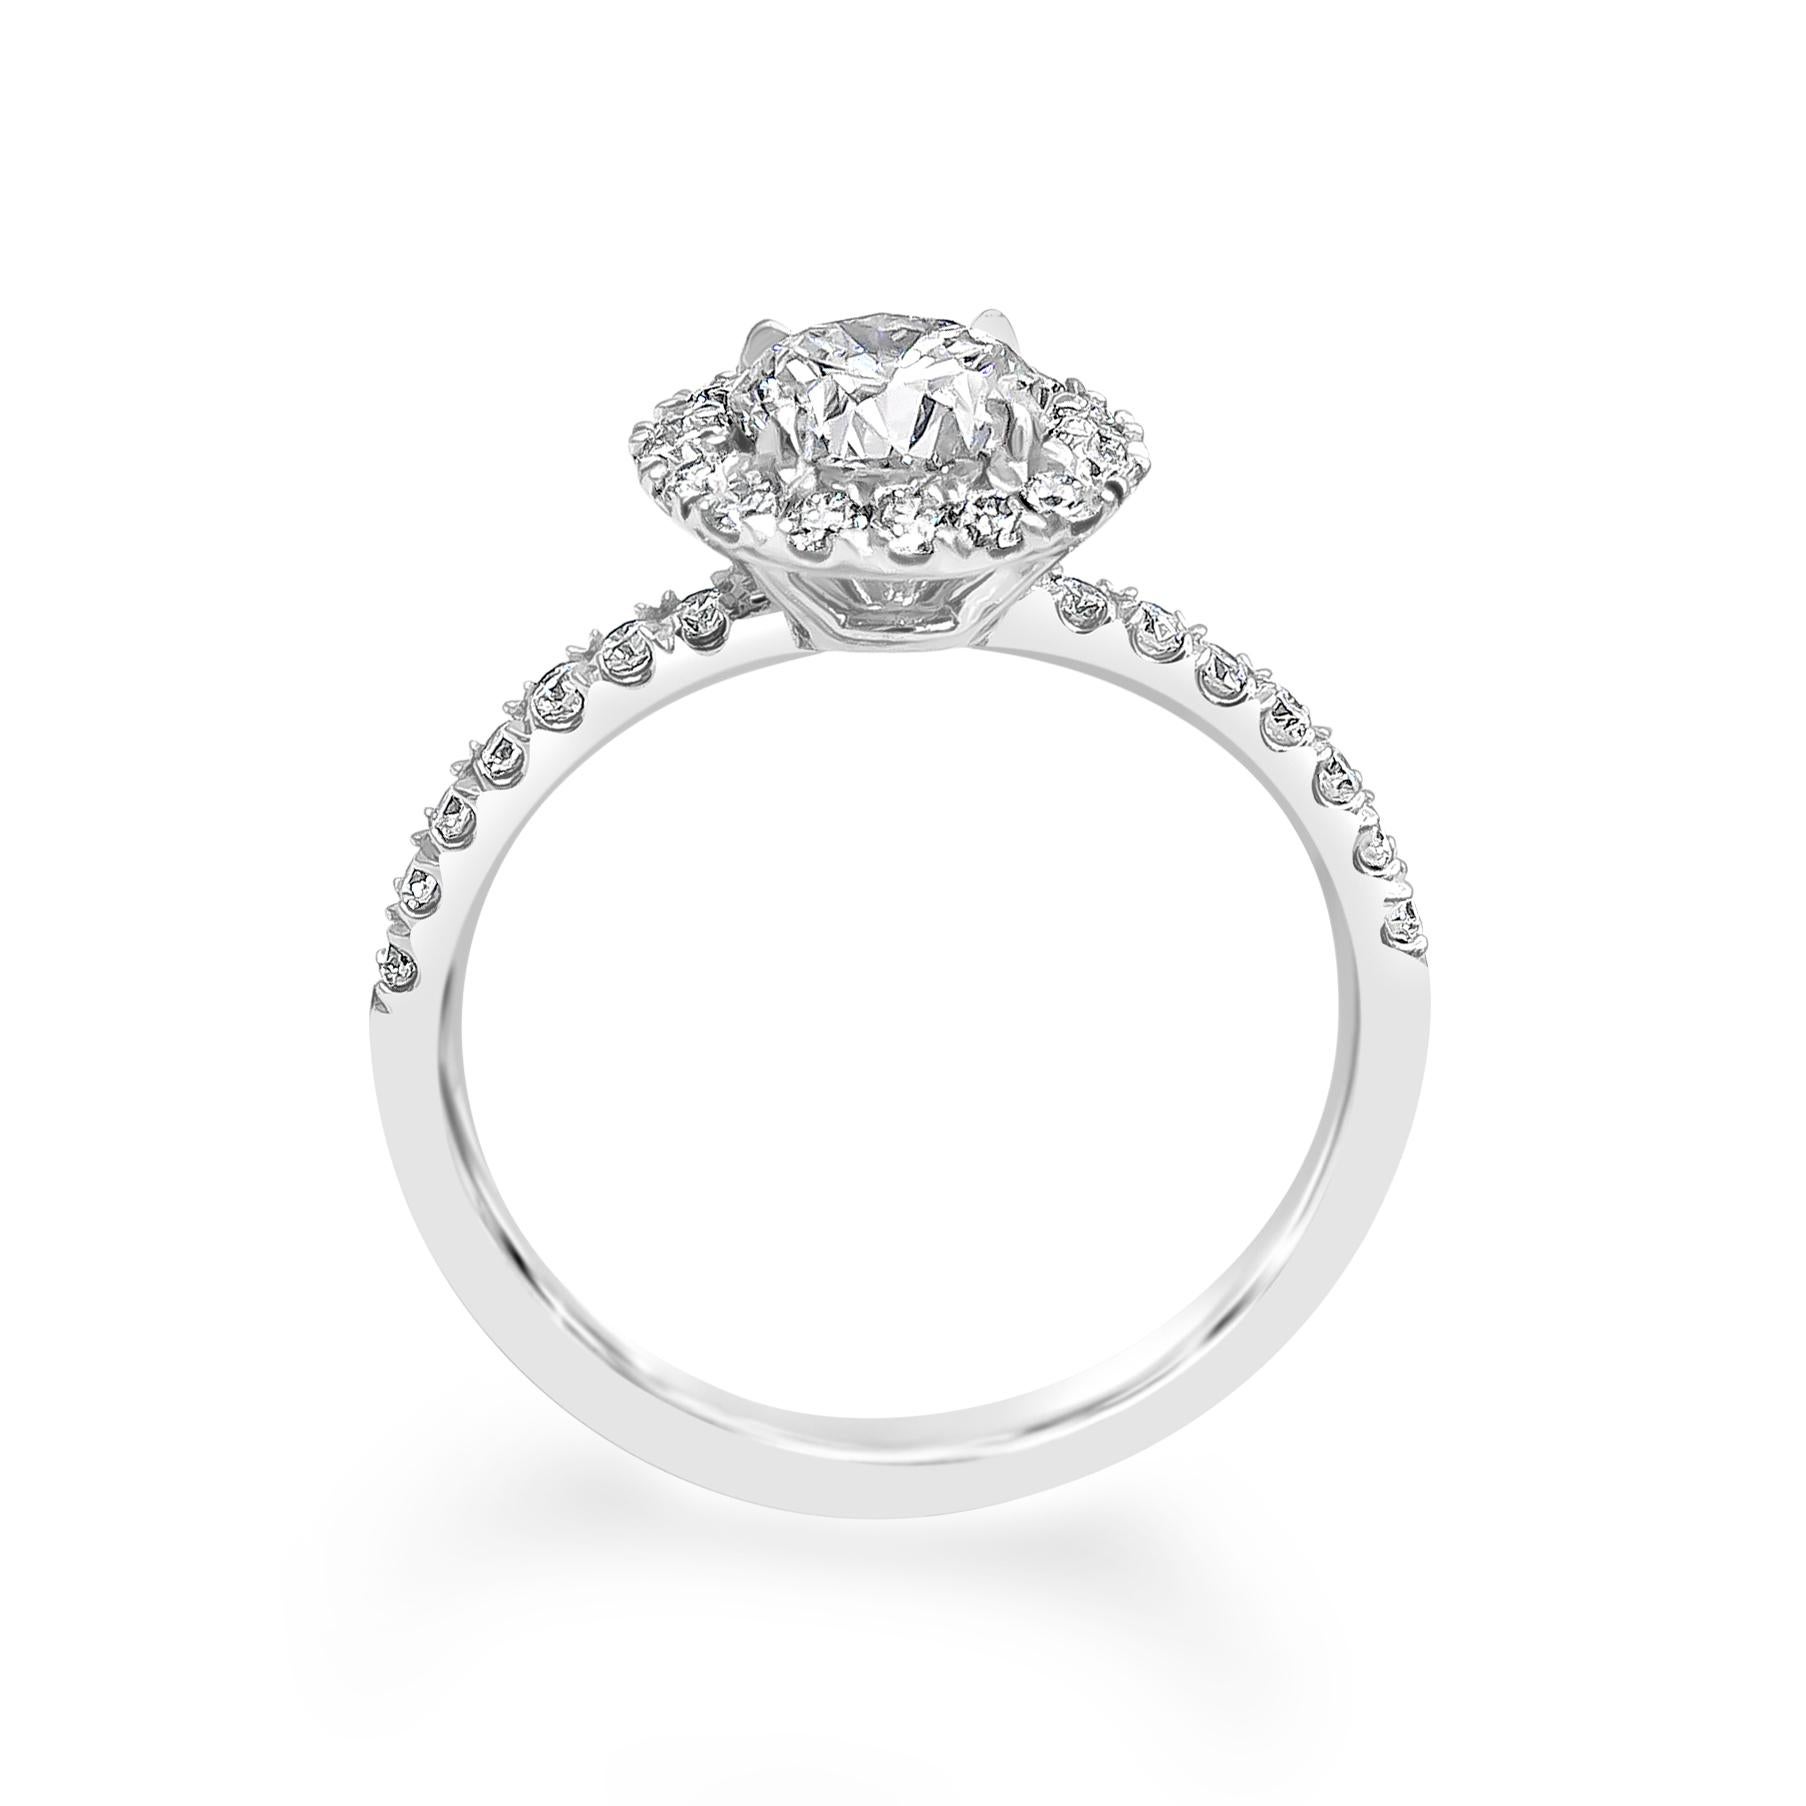 A classic and popular engagement ring style showcasing a 1.01 carat round brilliant diamond, certified by GIA as J color, VS2 clarity. Surrounding the diamond center is a single row of round brilliant diamonds, set on an accented pave mounting.